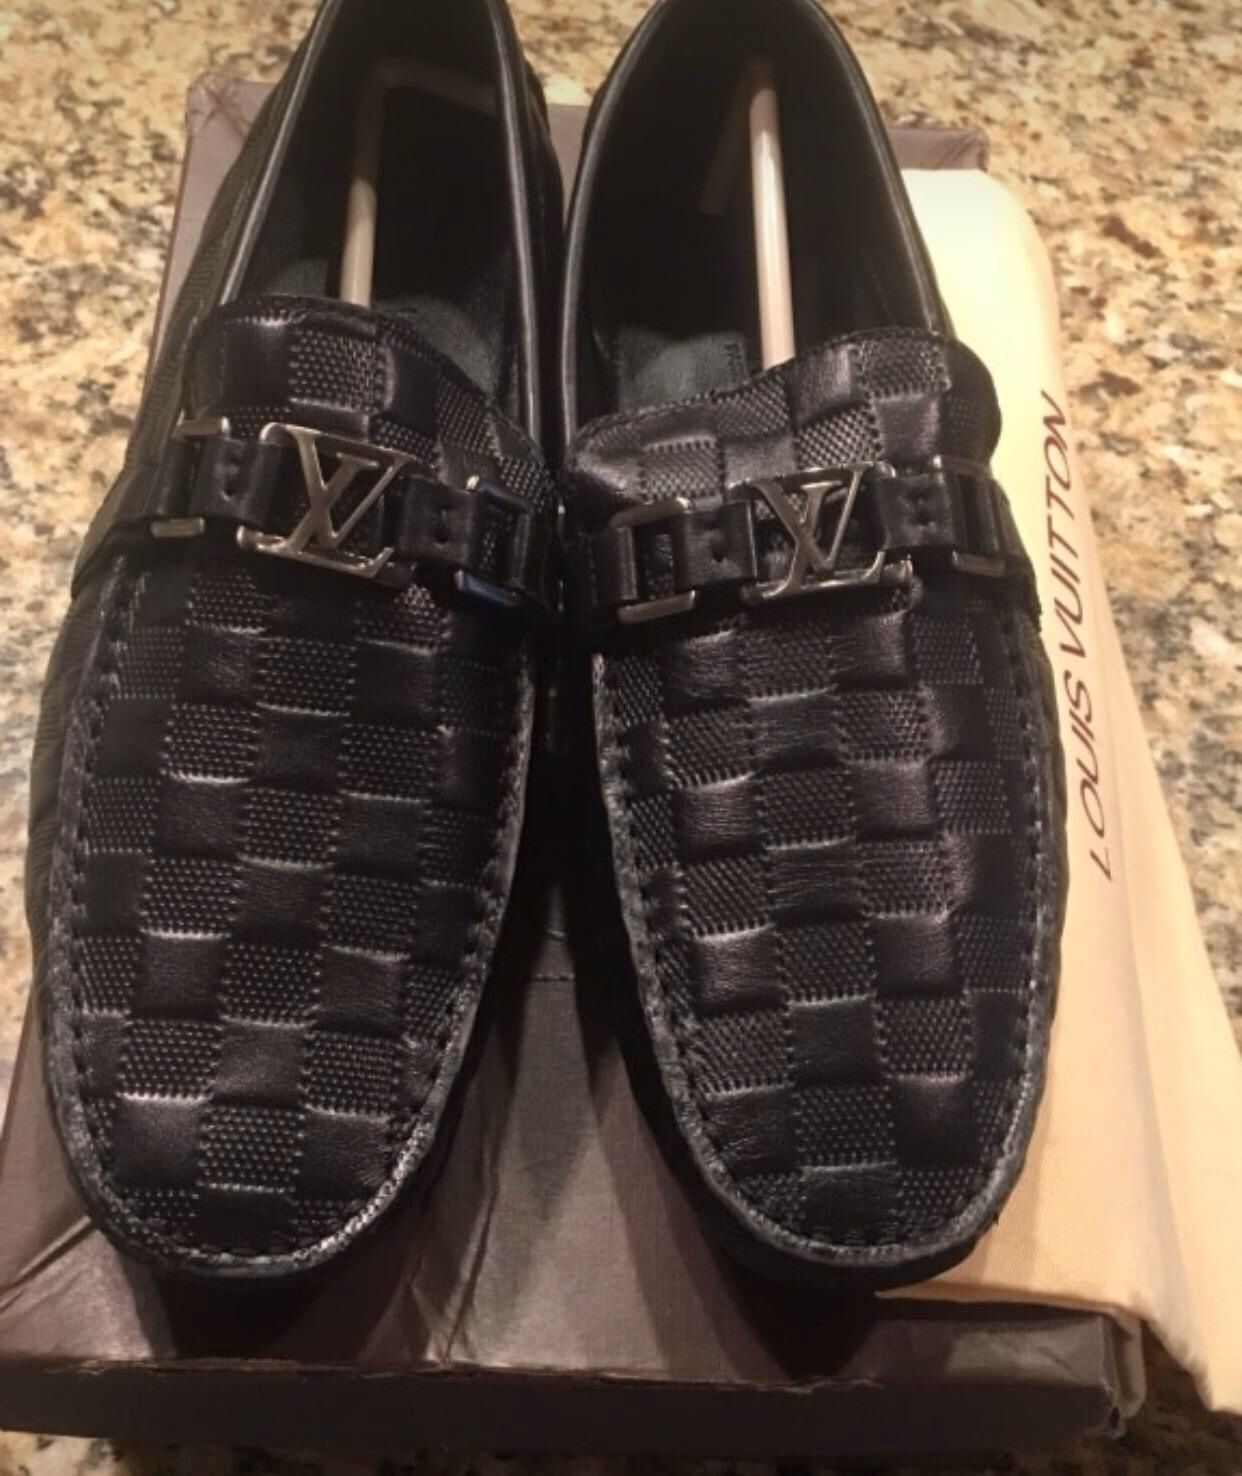 Lv loafers size 8-9 brand new good for prom $240